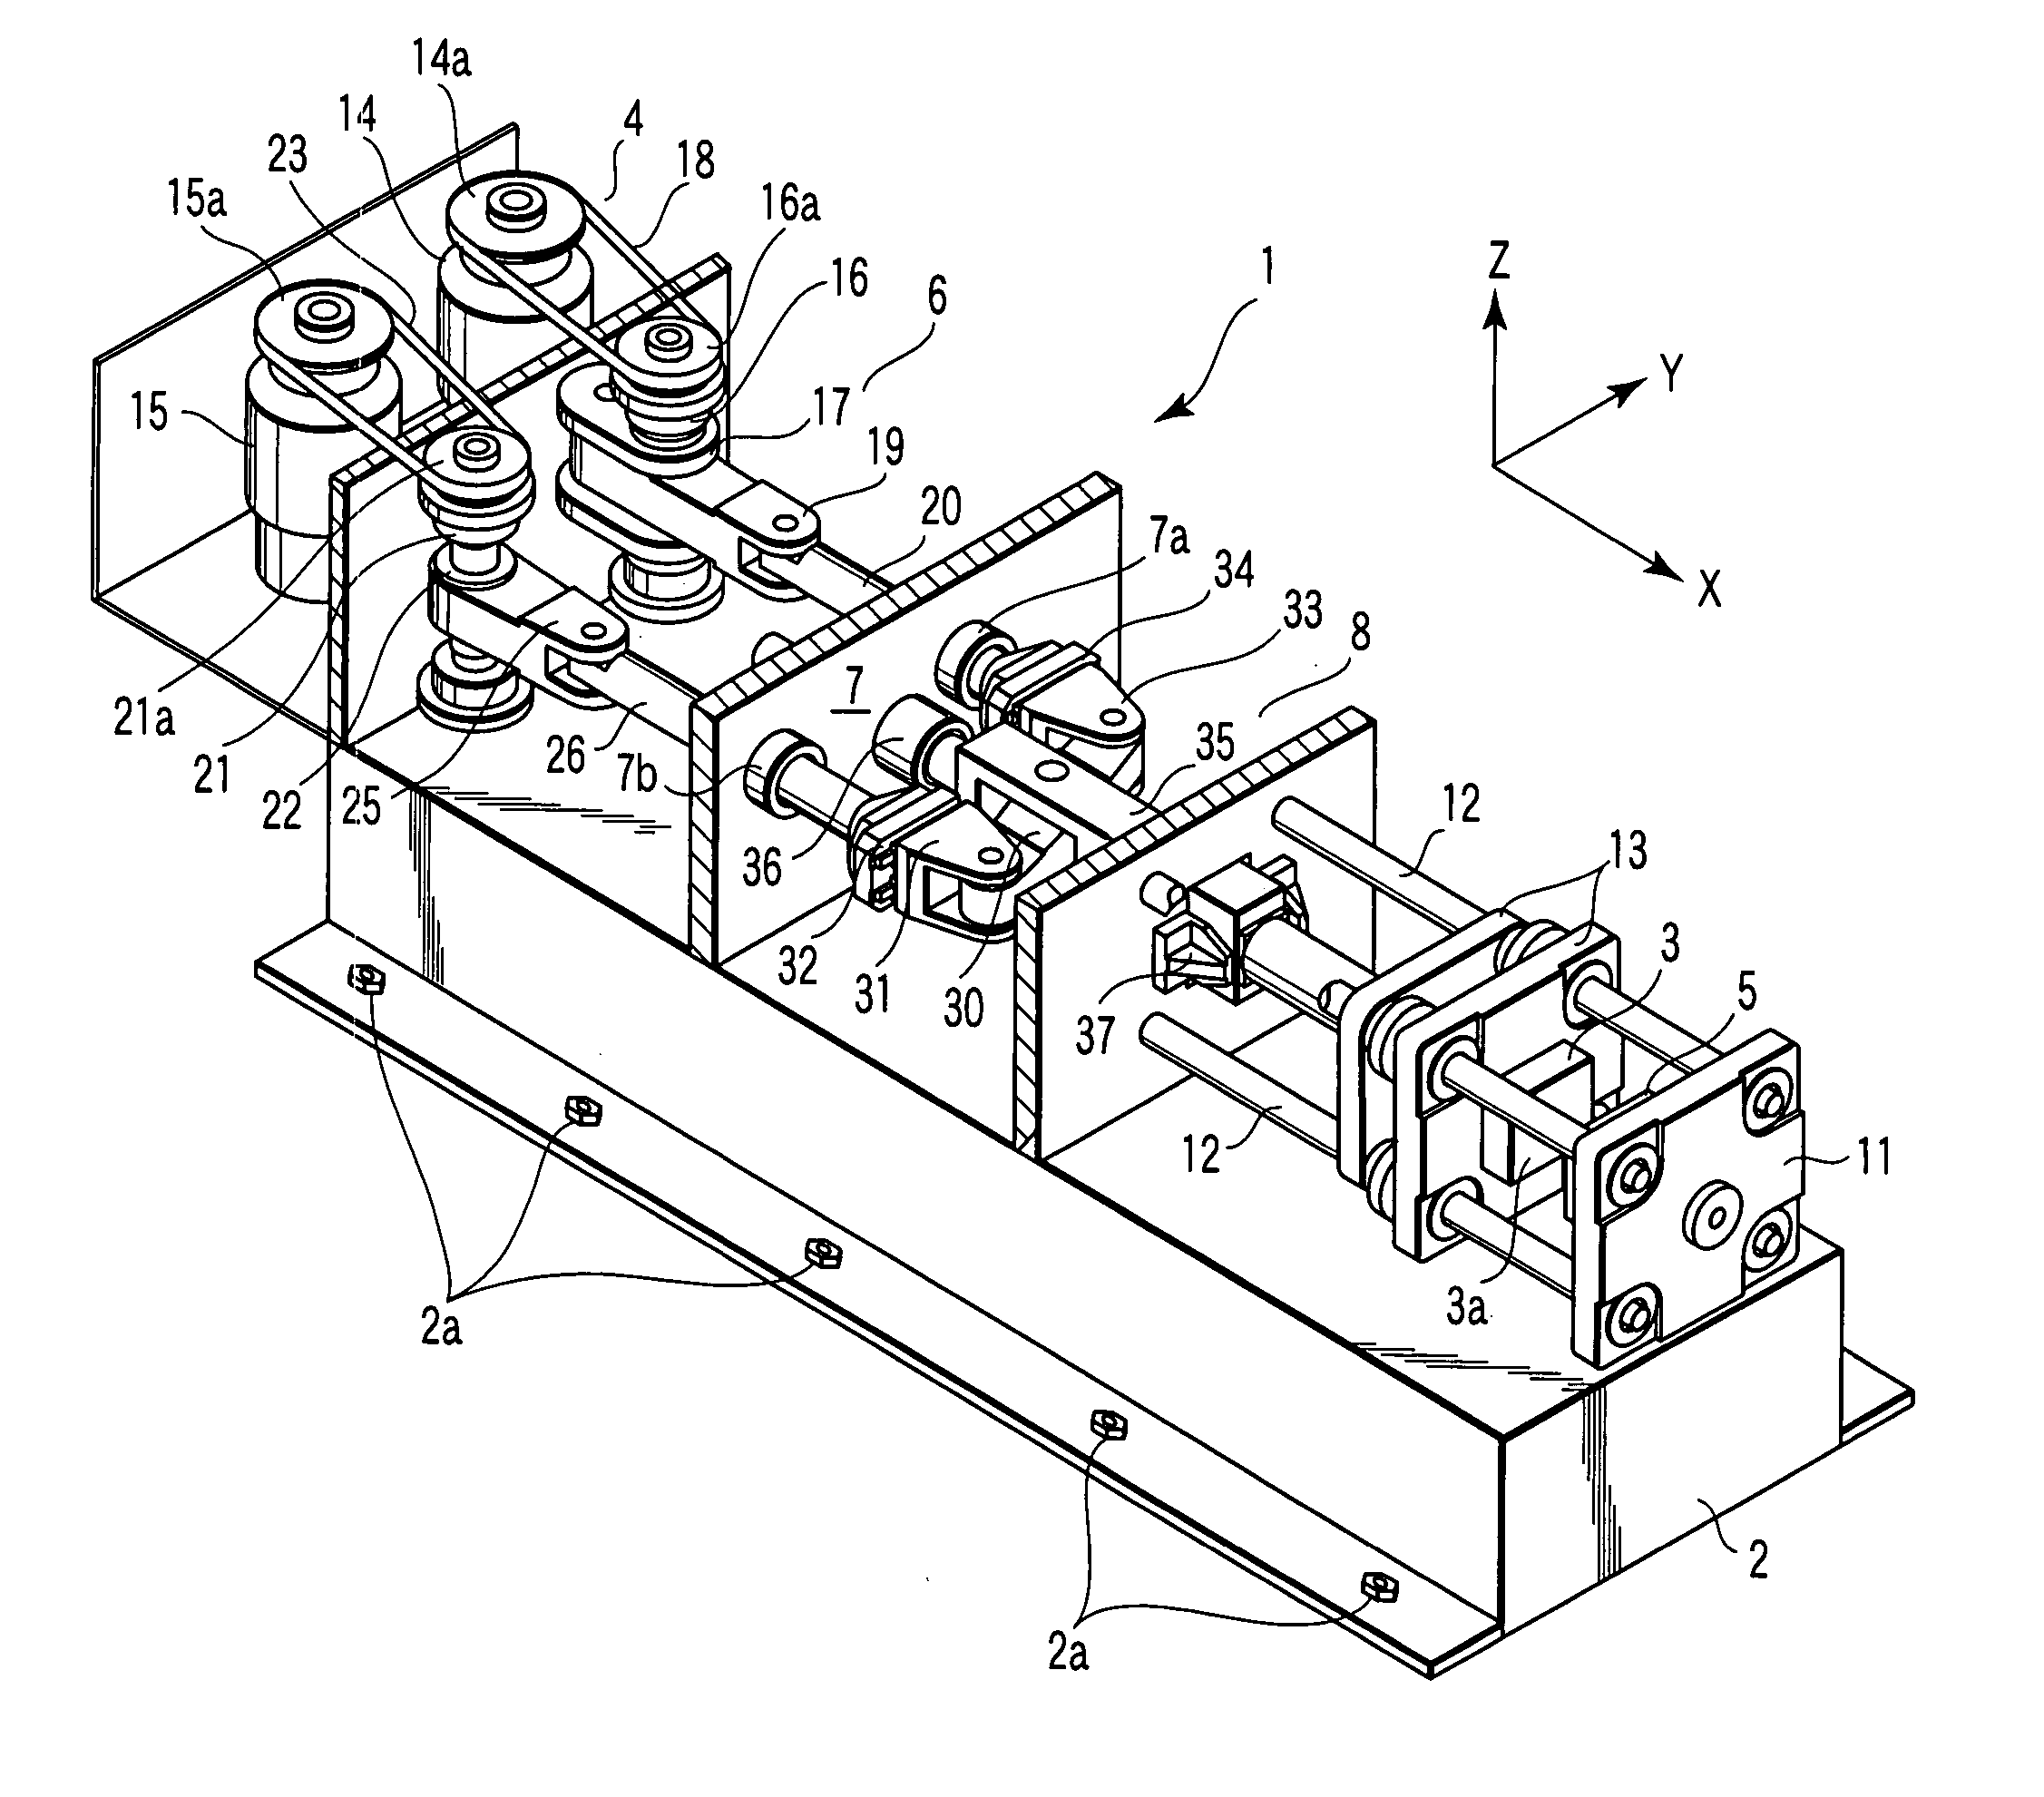 Press mechanism, clamp mechanism, and molding machine using this clamp mechanism